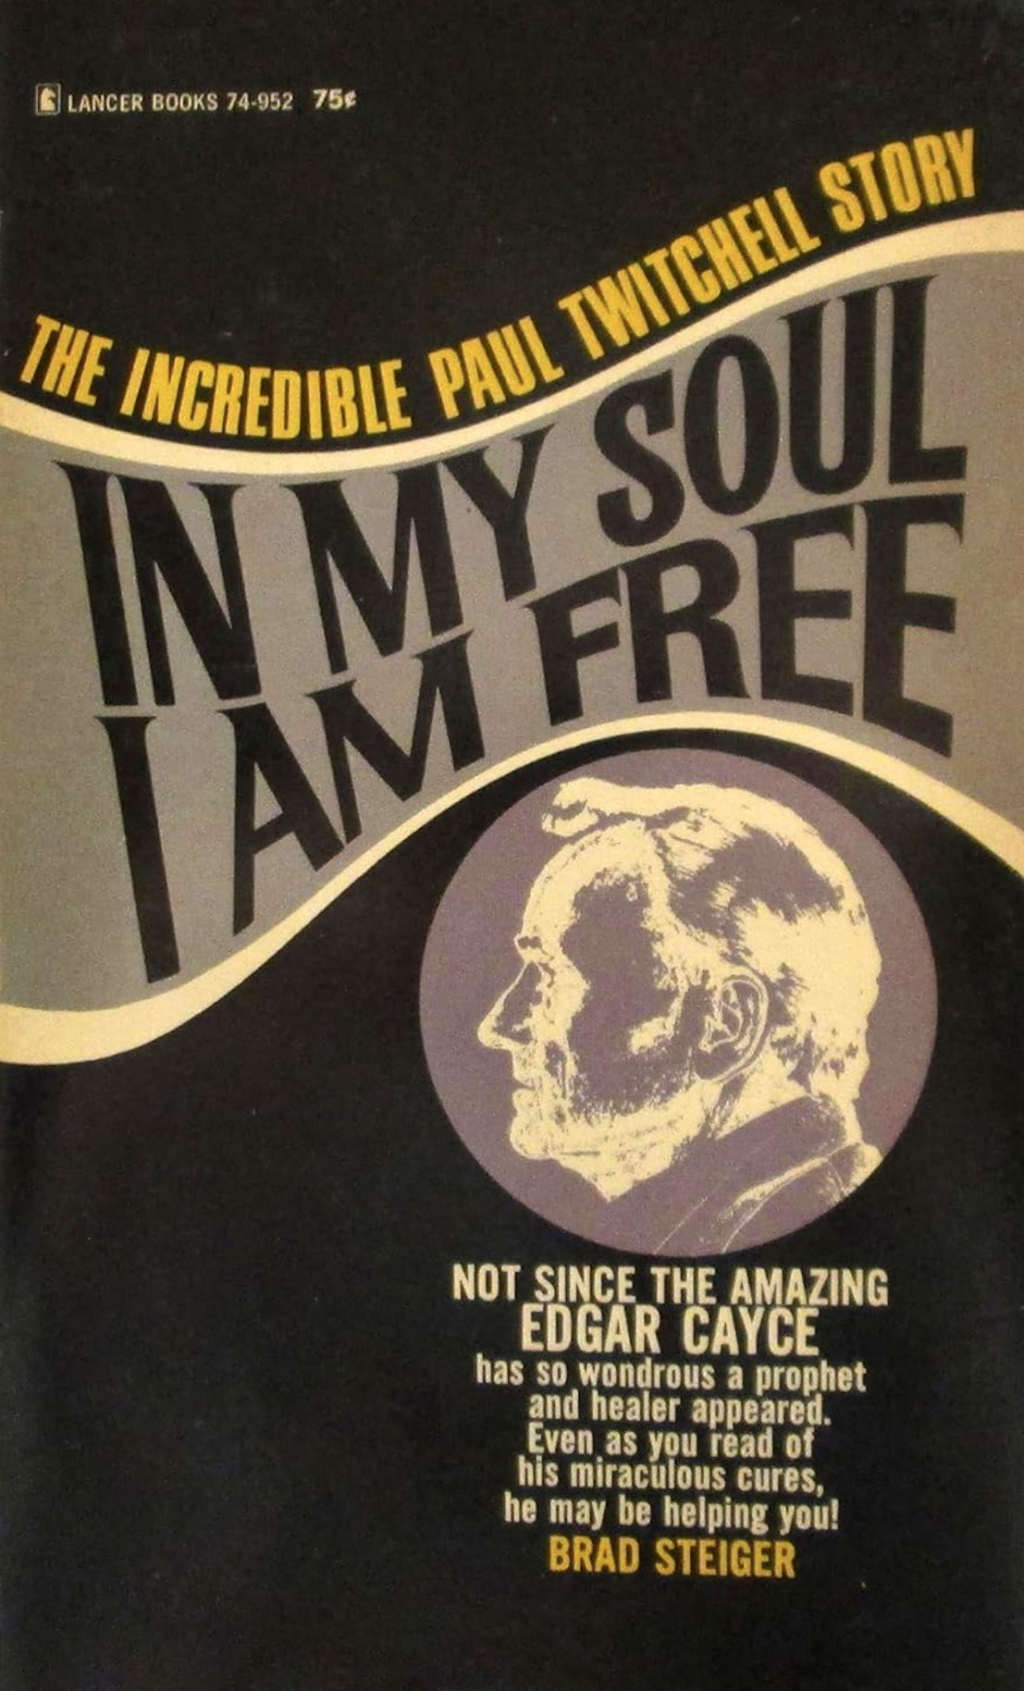 The cover of In My Soul I Am Free by Paul Twitchell